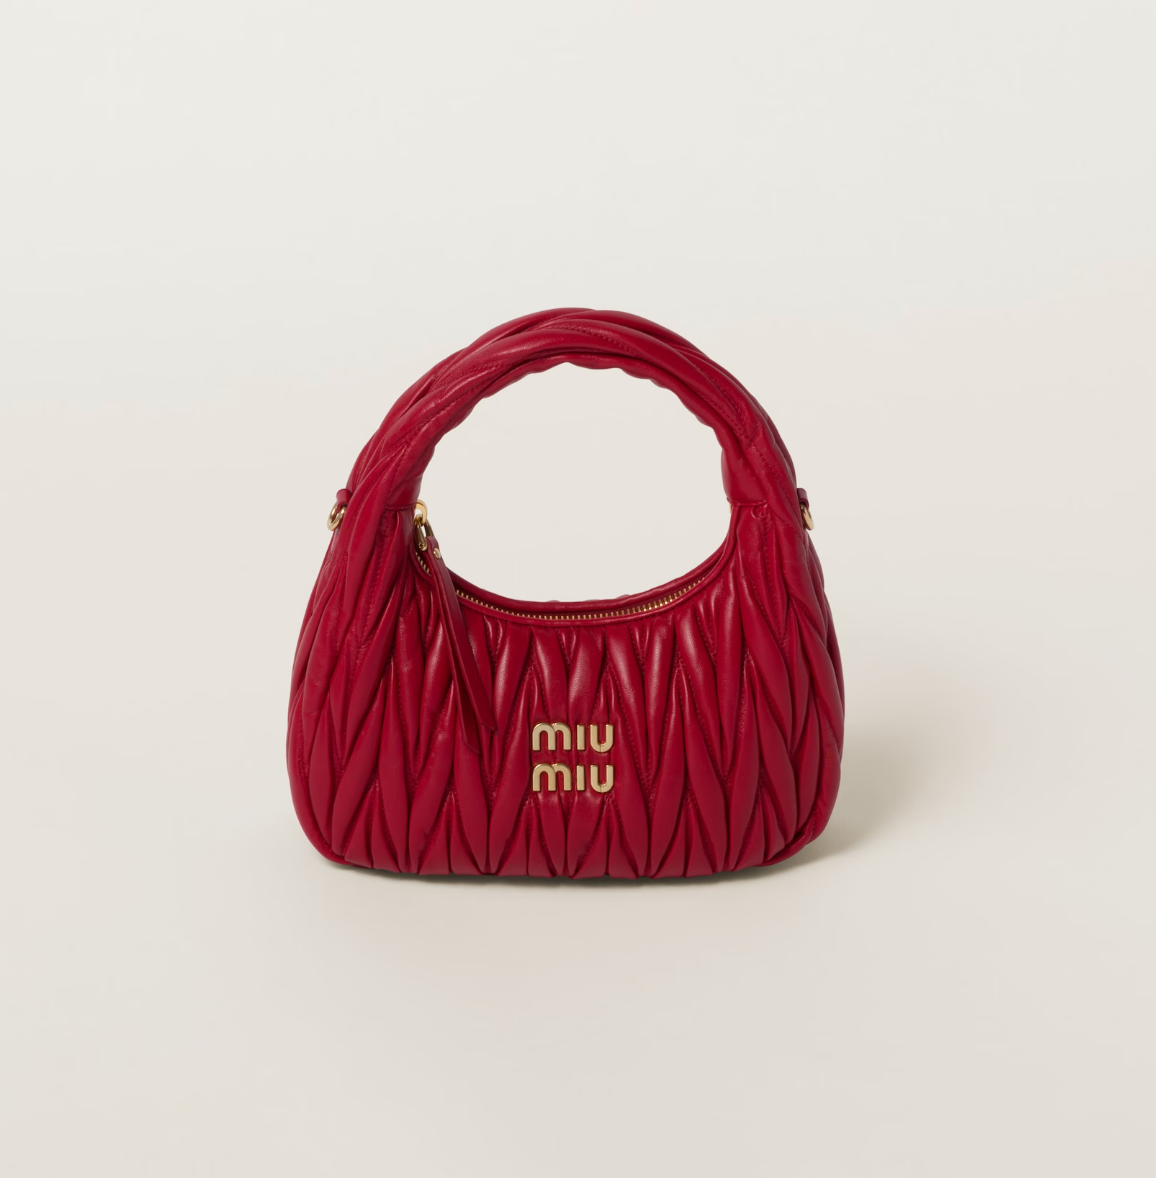 Rent for your upcoming holiday! Image of Miu Miu Wander Matelassé Nappa Leather Hobo Bag in [insert color] - Quilted design crafted from luxurious Nappa leather, featuring spacious hobo silhouette and iconic Miu Miu branding.